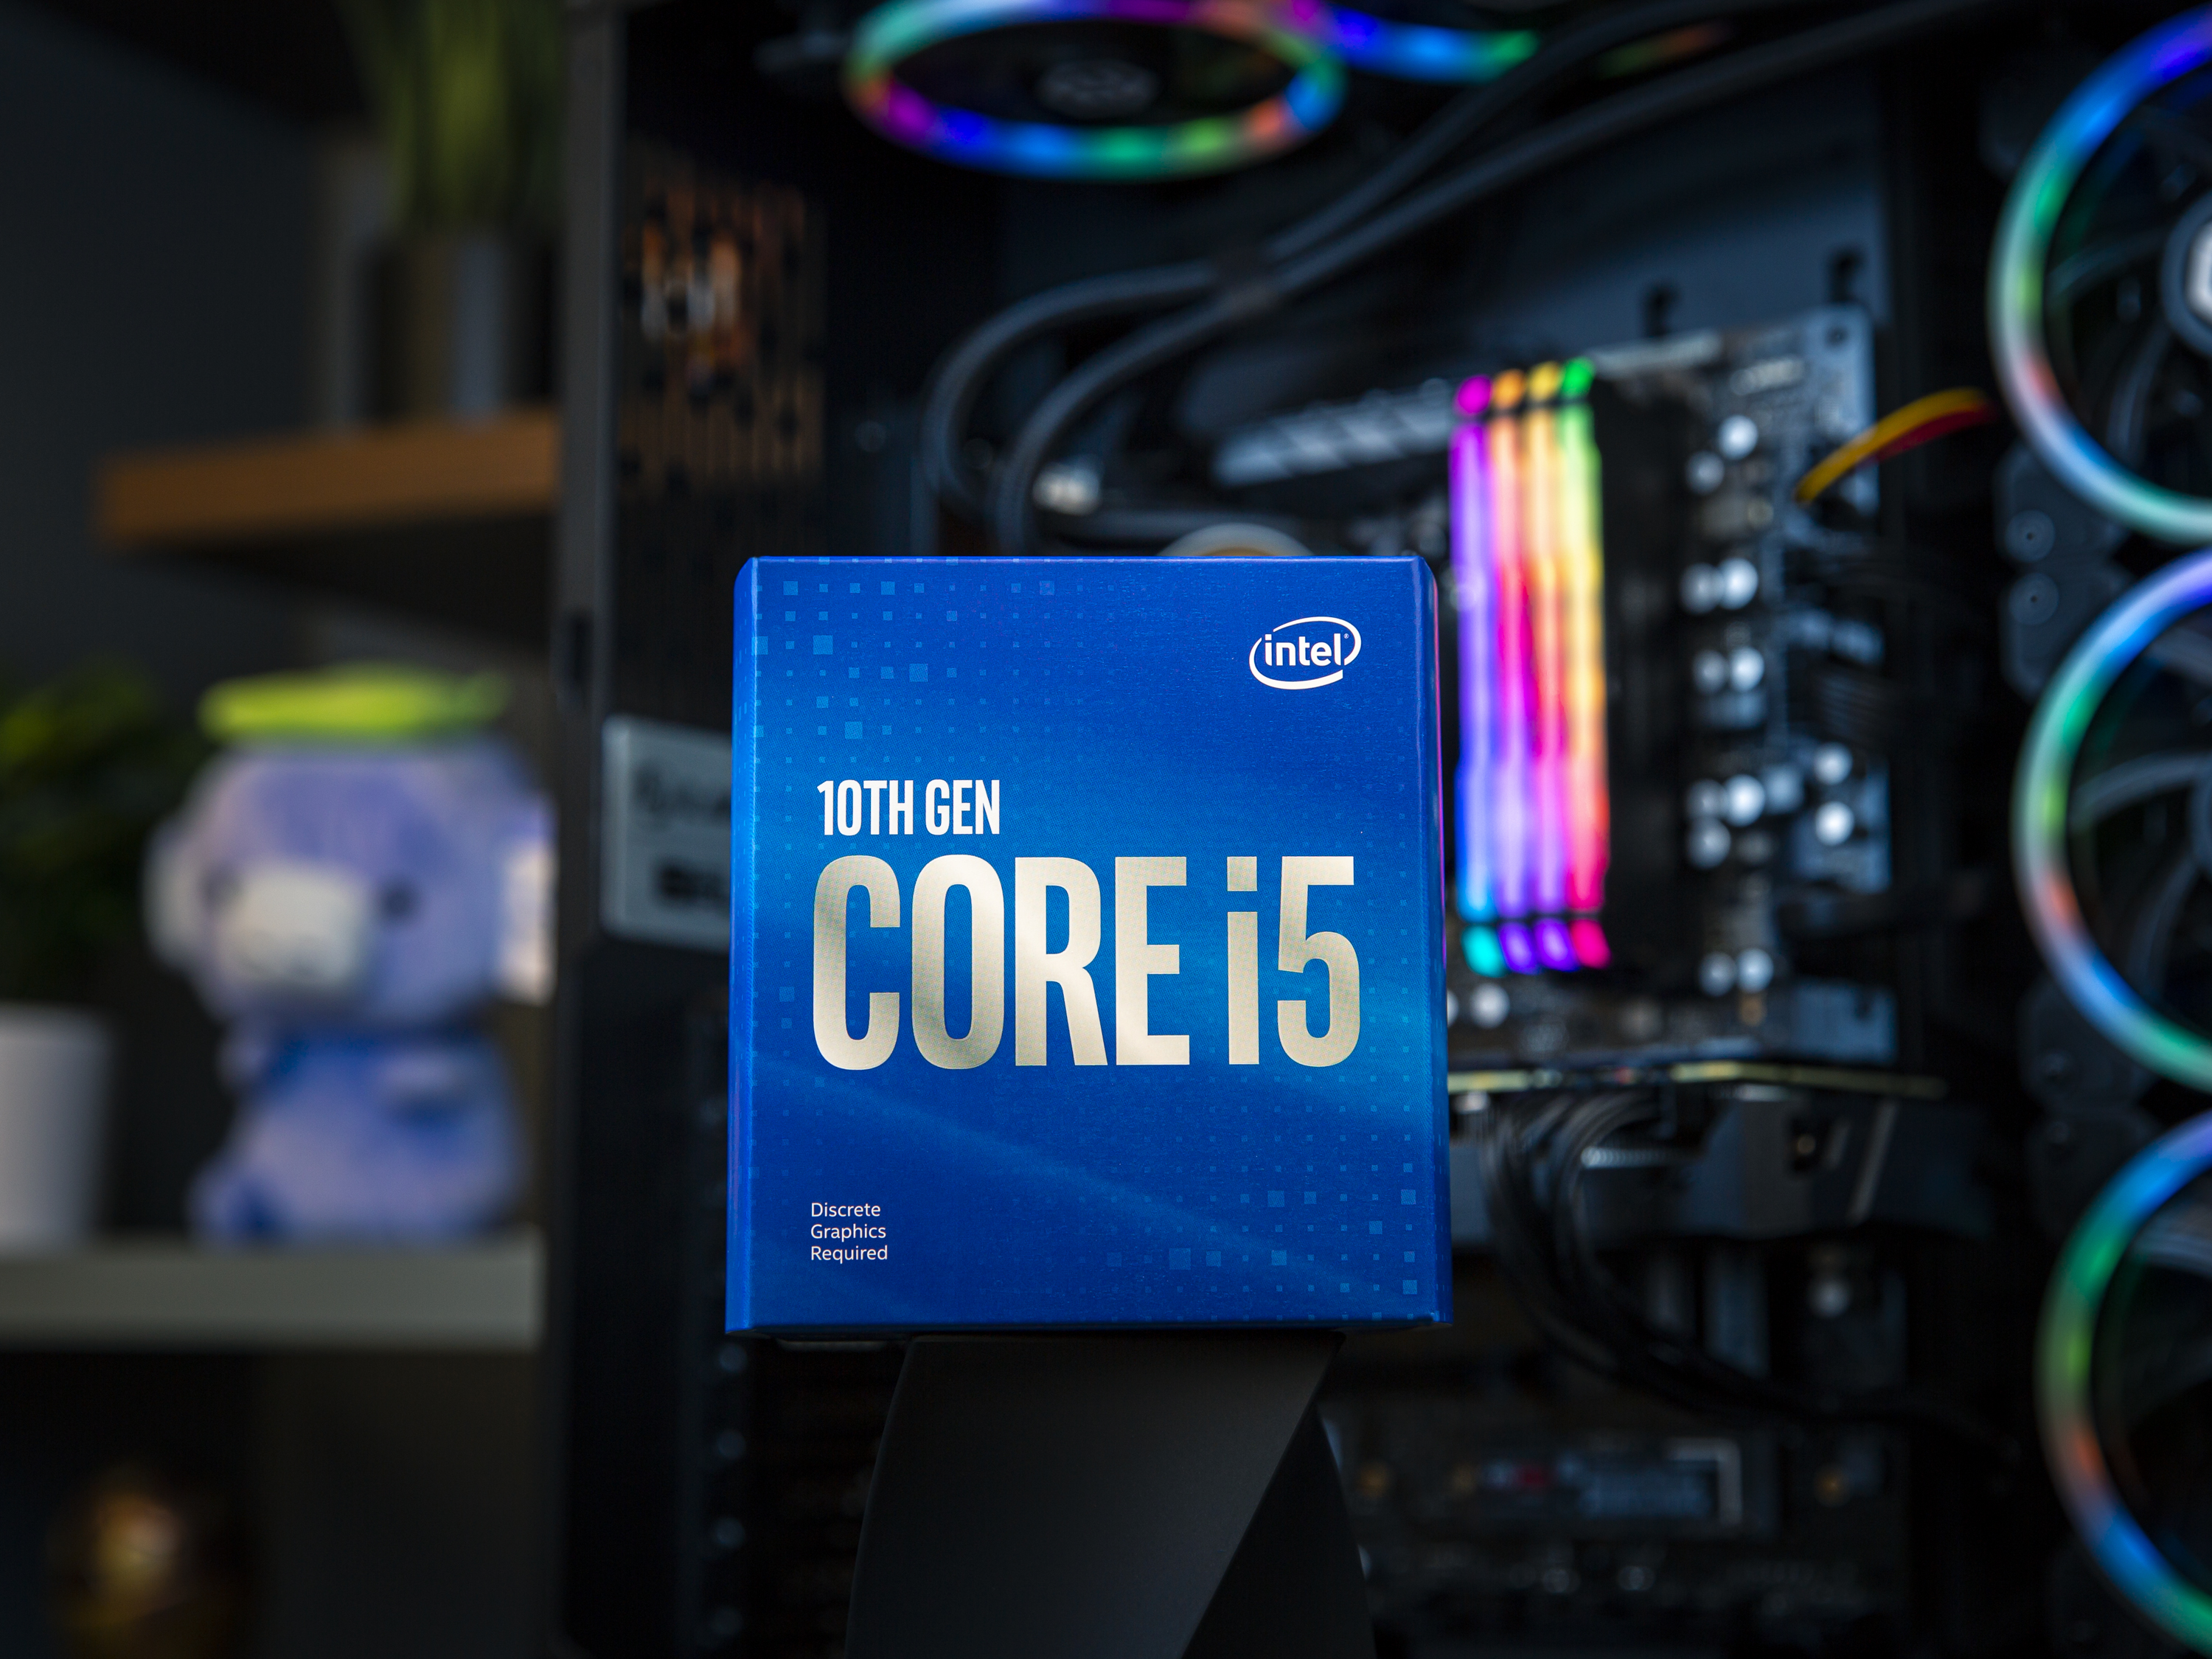 Intel Core i5-10400 Benchmarked: Comet Lake CPU Edges Out i5-9400F